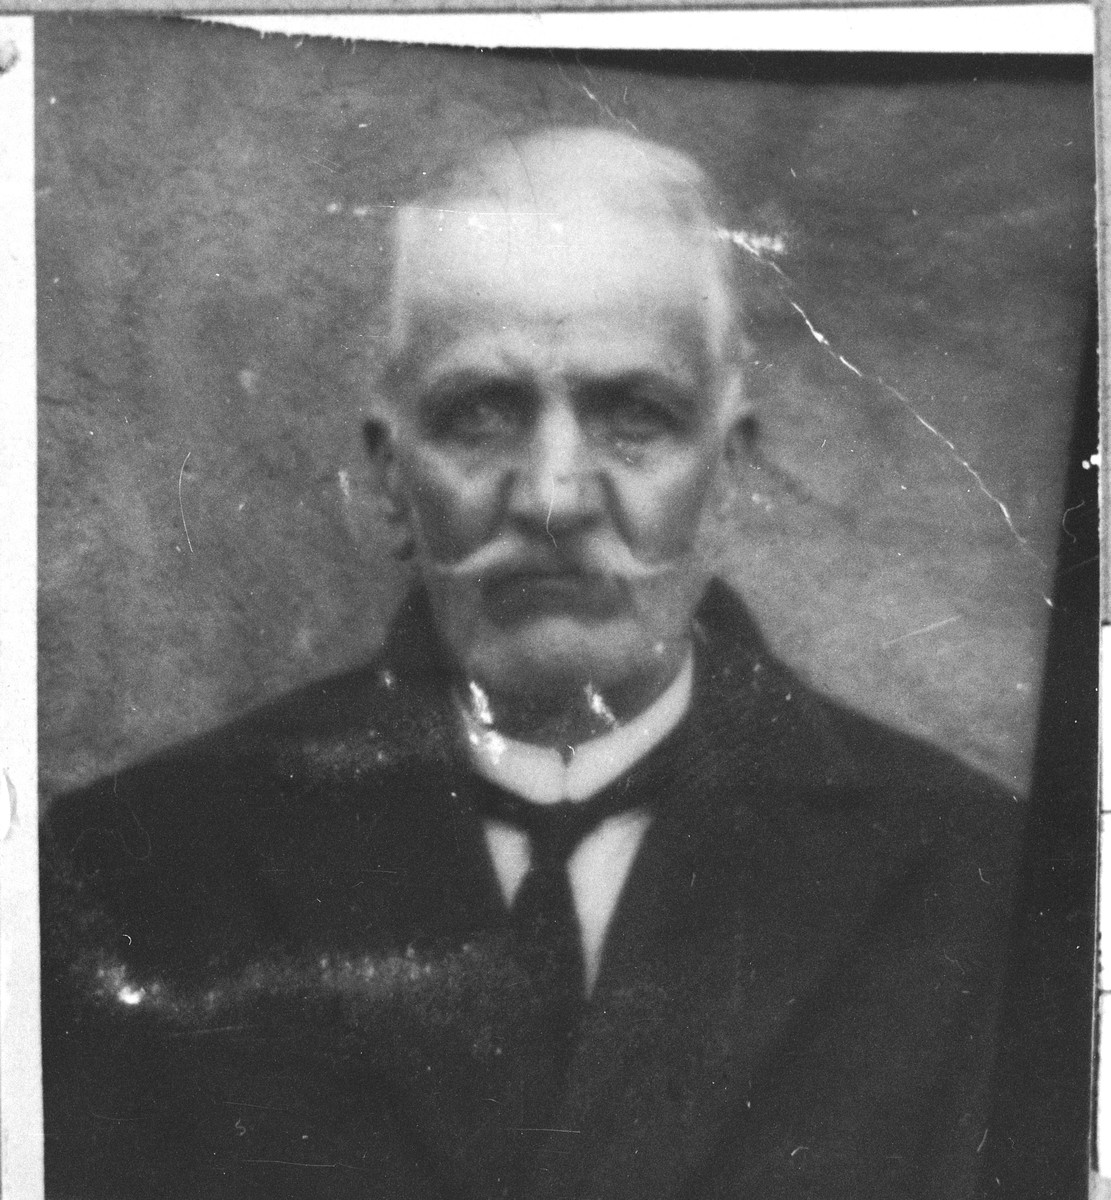 Portrait of Shua Kassorla.  He lived at Karagoryeva 52 in Bitola.  He was born in 1879 and worked as a second-hand dealer.